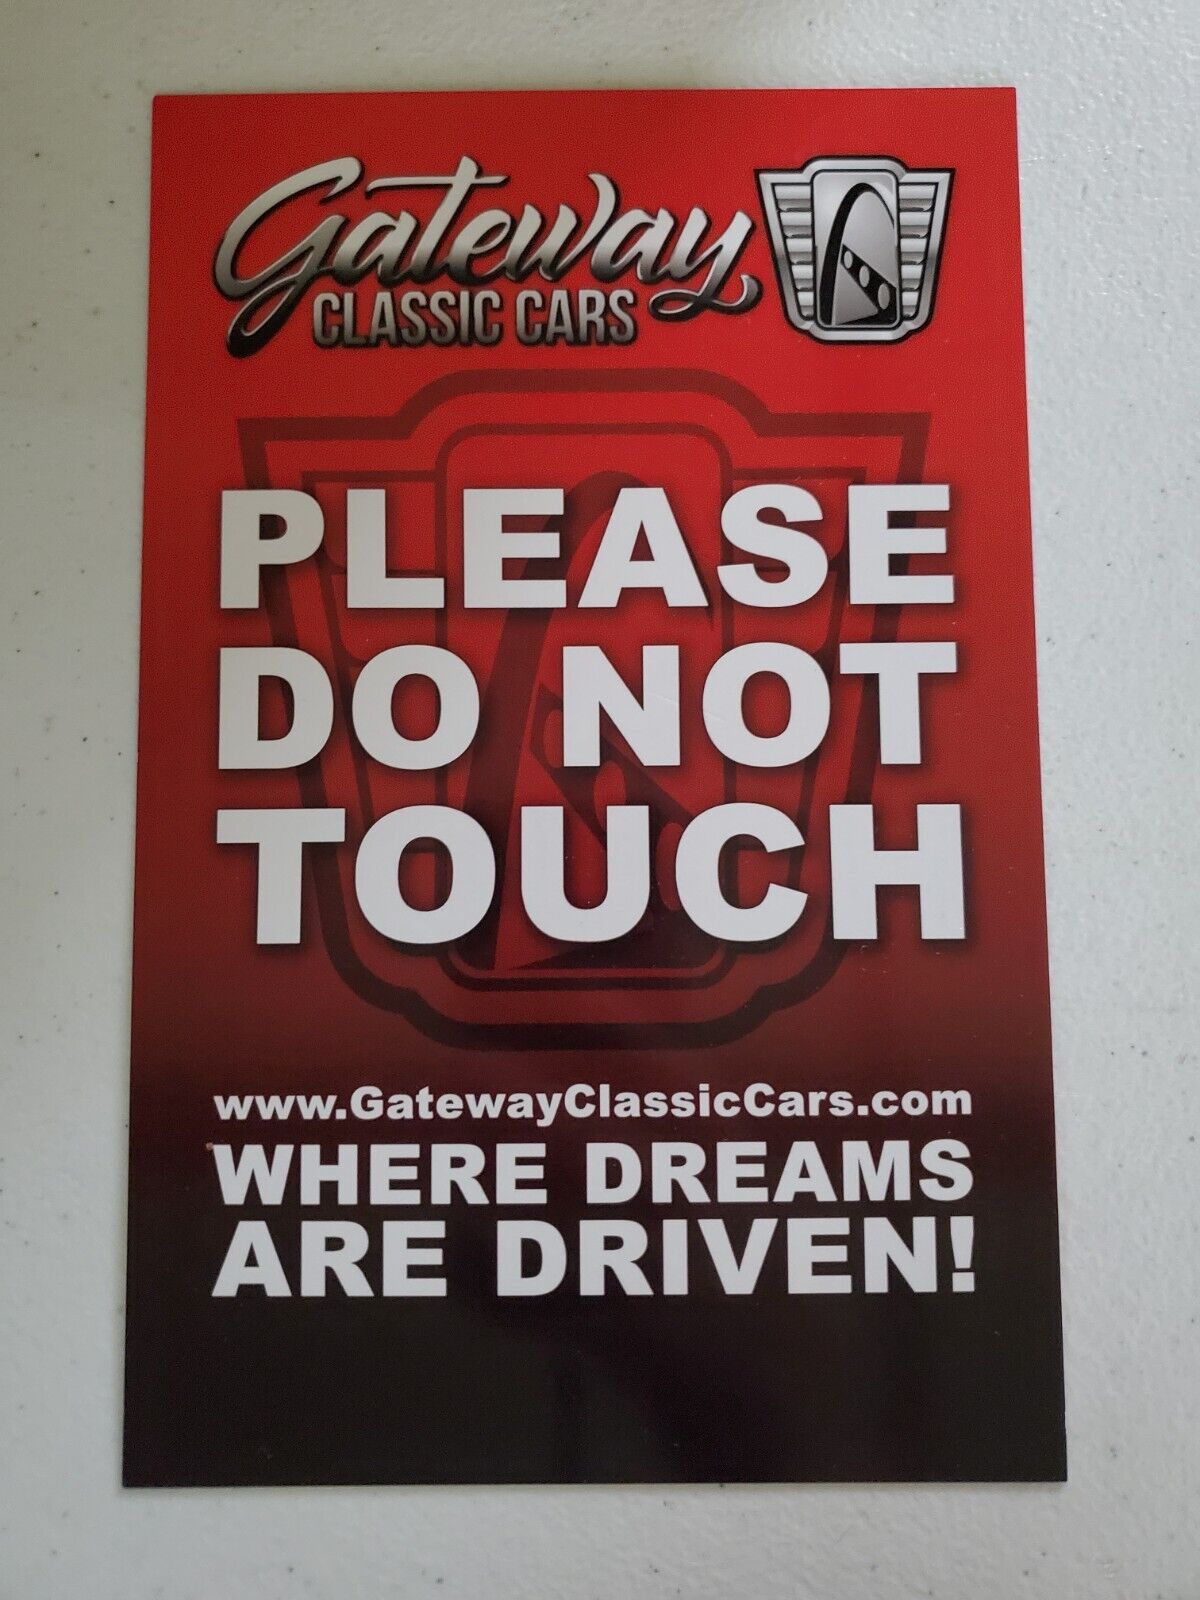 Gateway Classic Cars PLEASE DO NOT TOUCH Paperstock Dashboard Sign For Car Shows